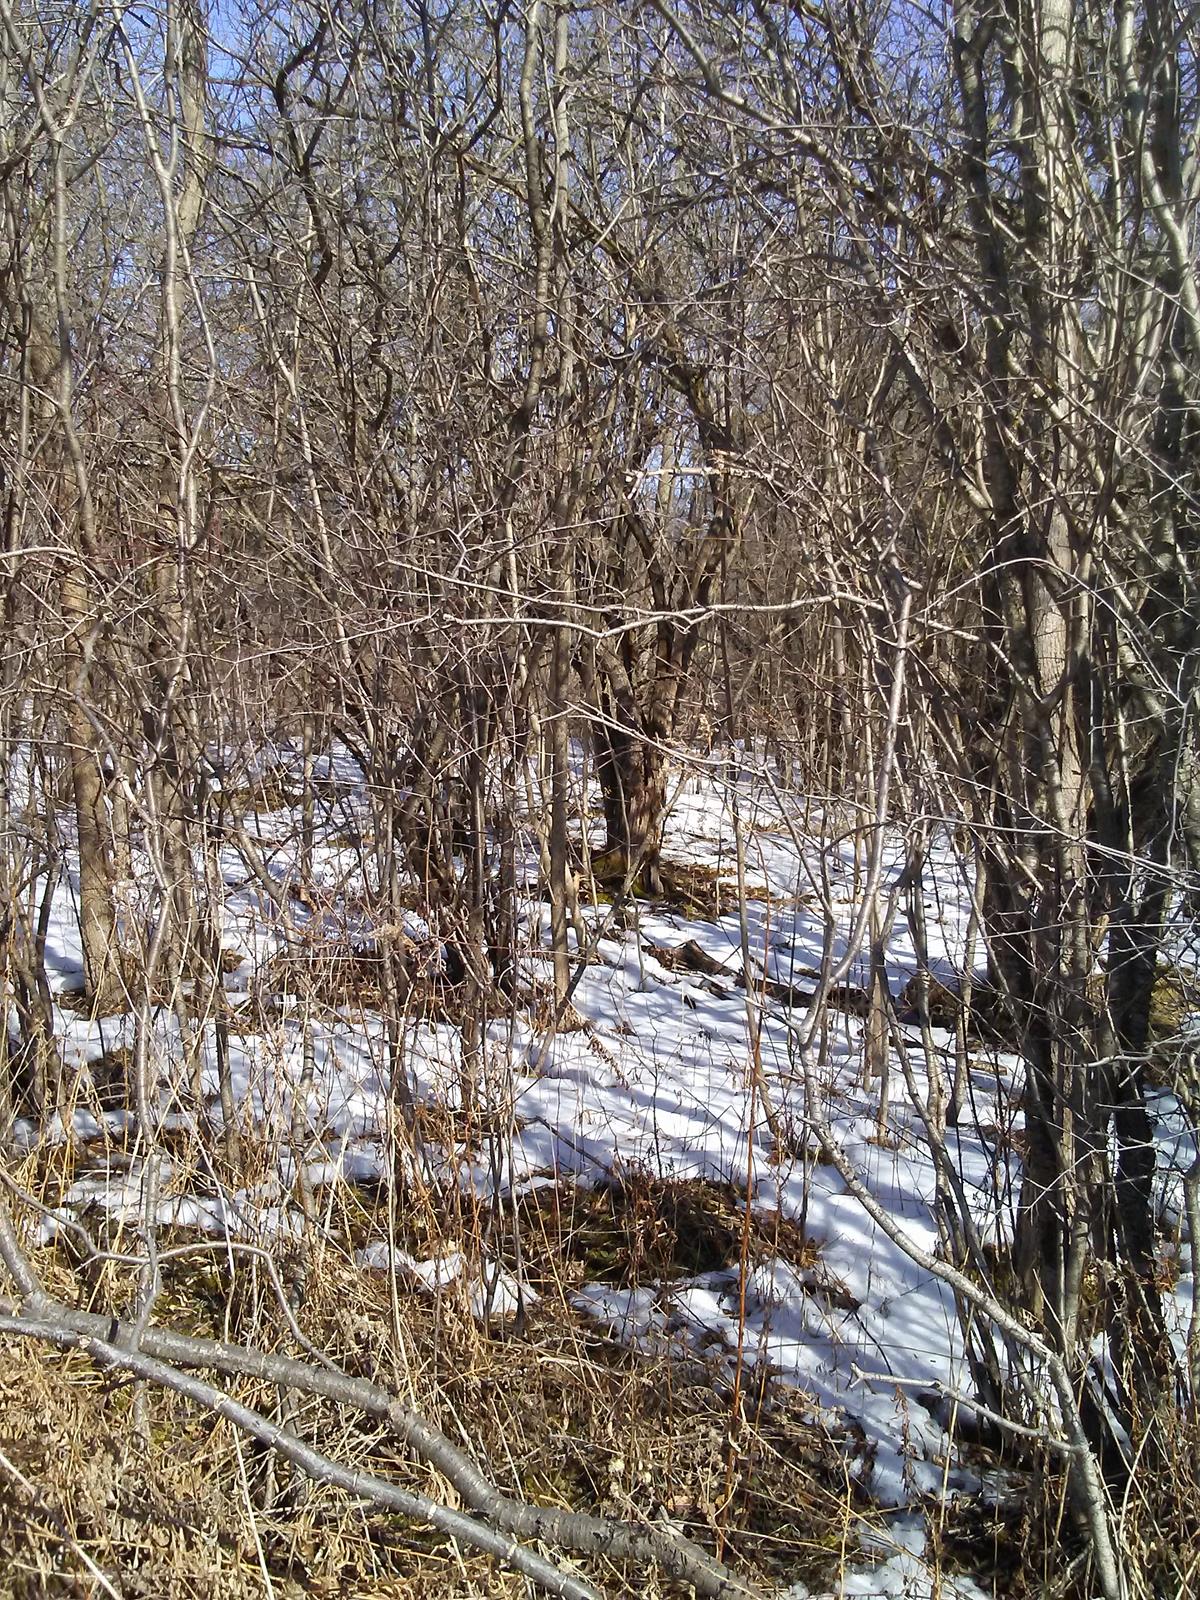 invasive buckthorn near the edge of the forest.